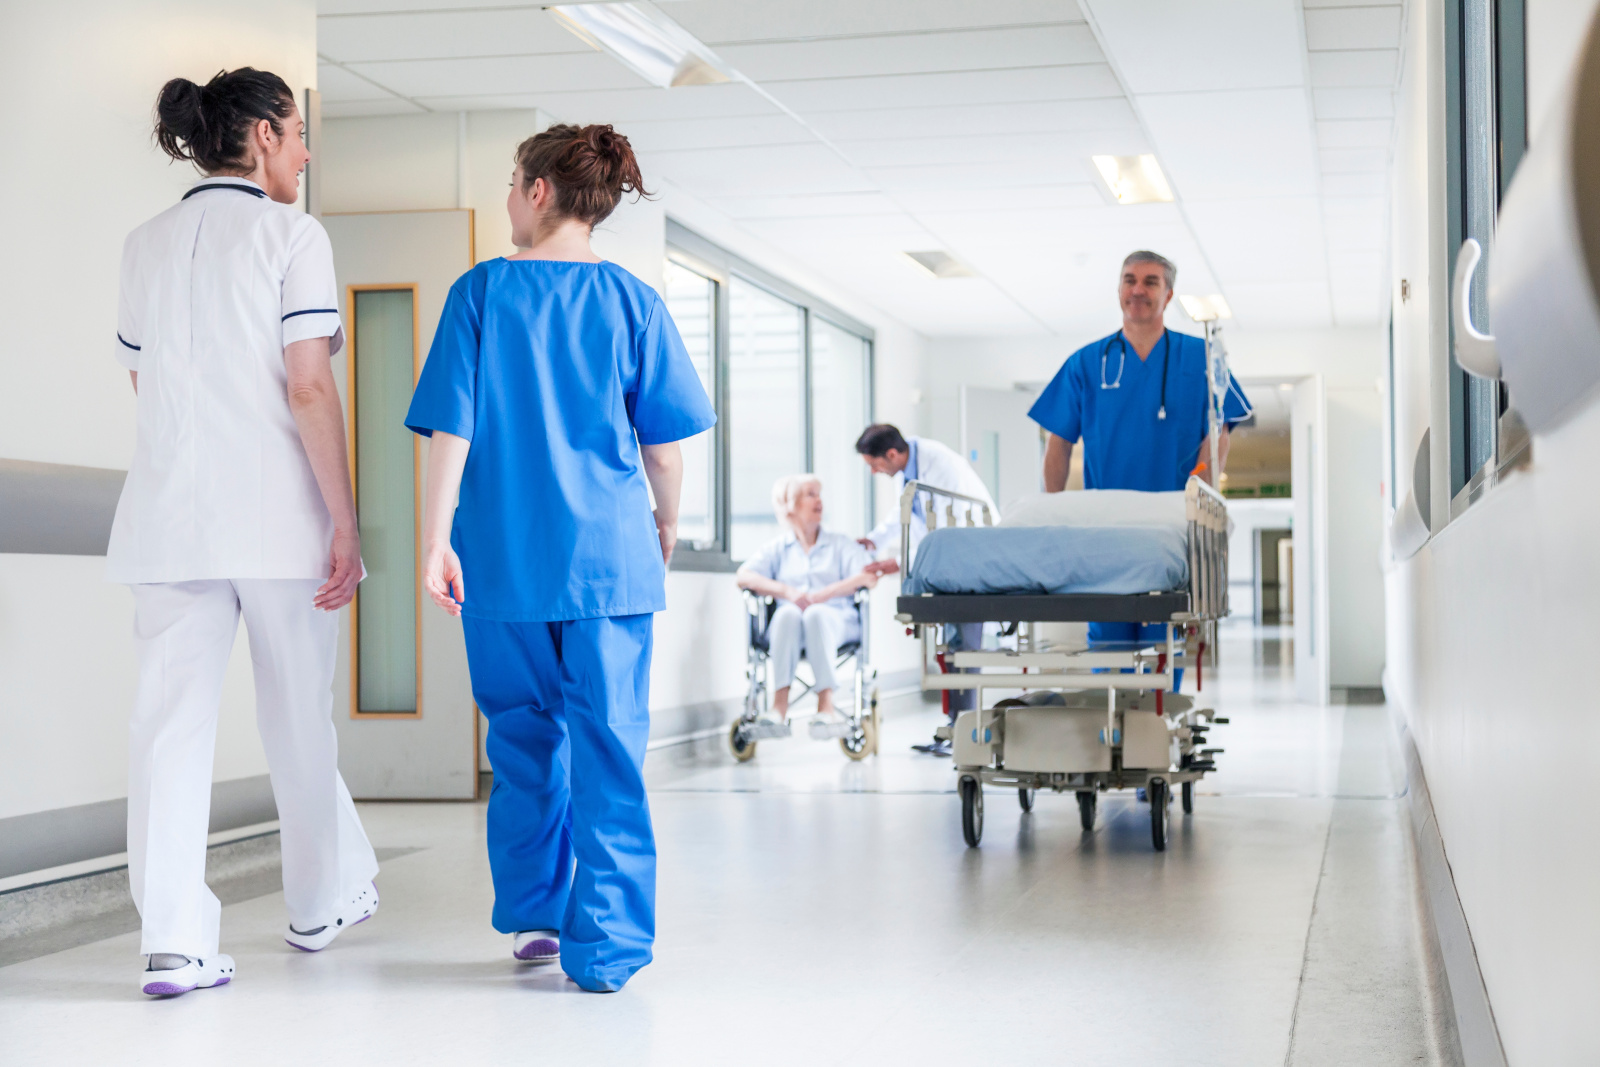 Temporary employee availability management within a hospital